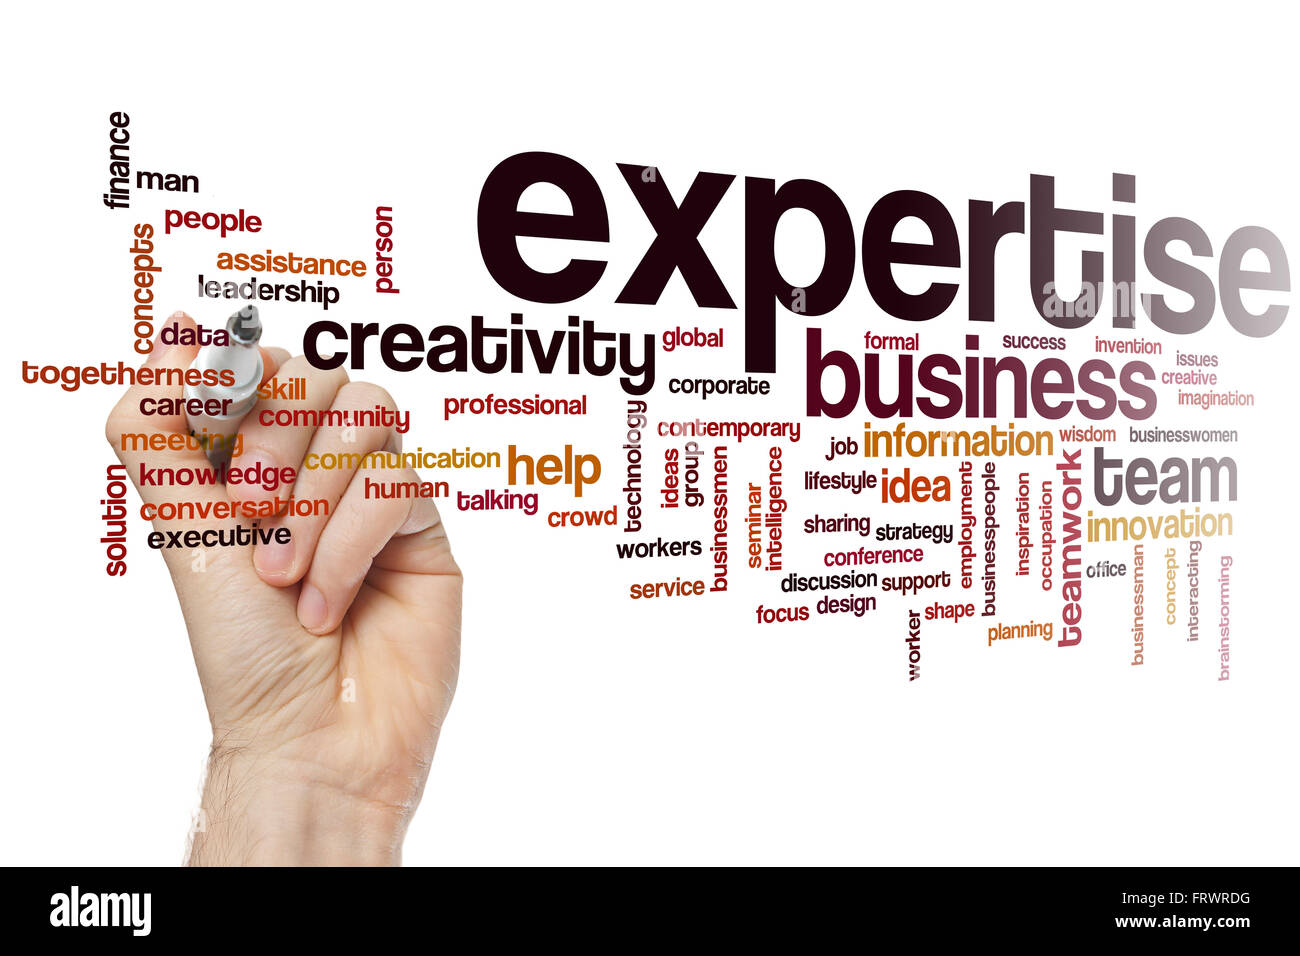 Expertise word cloud concept Stock Photo